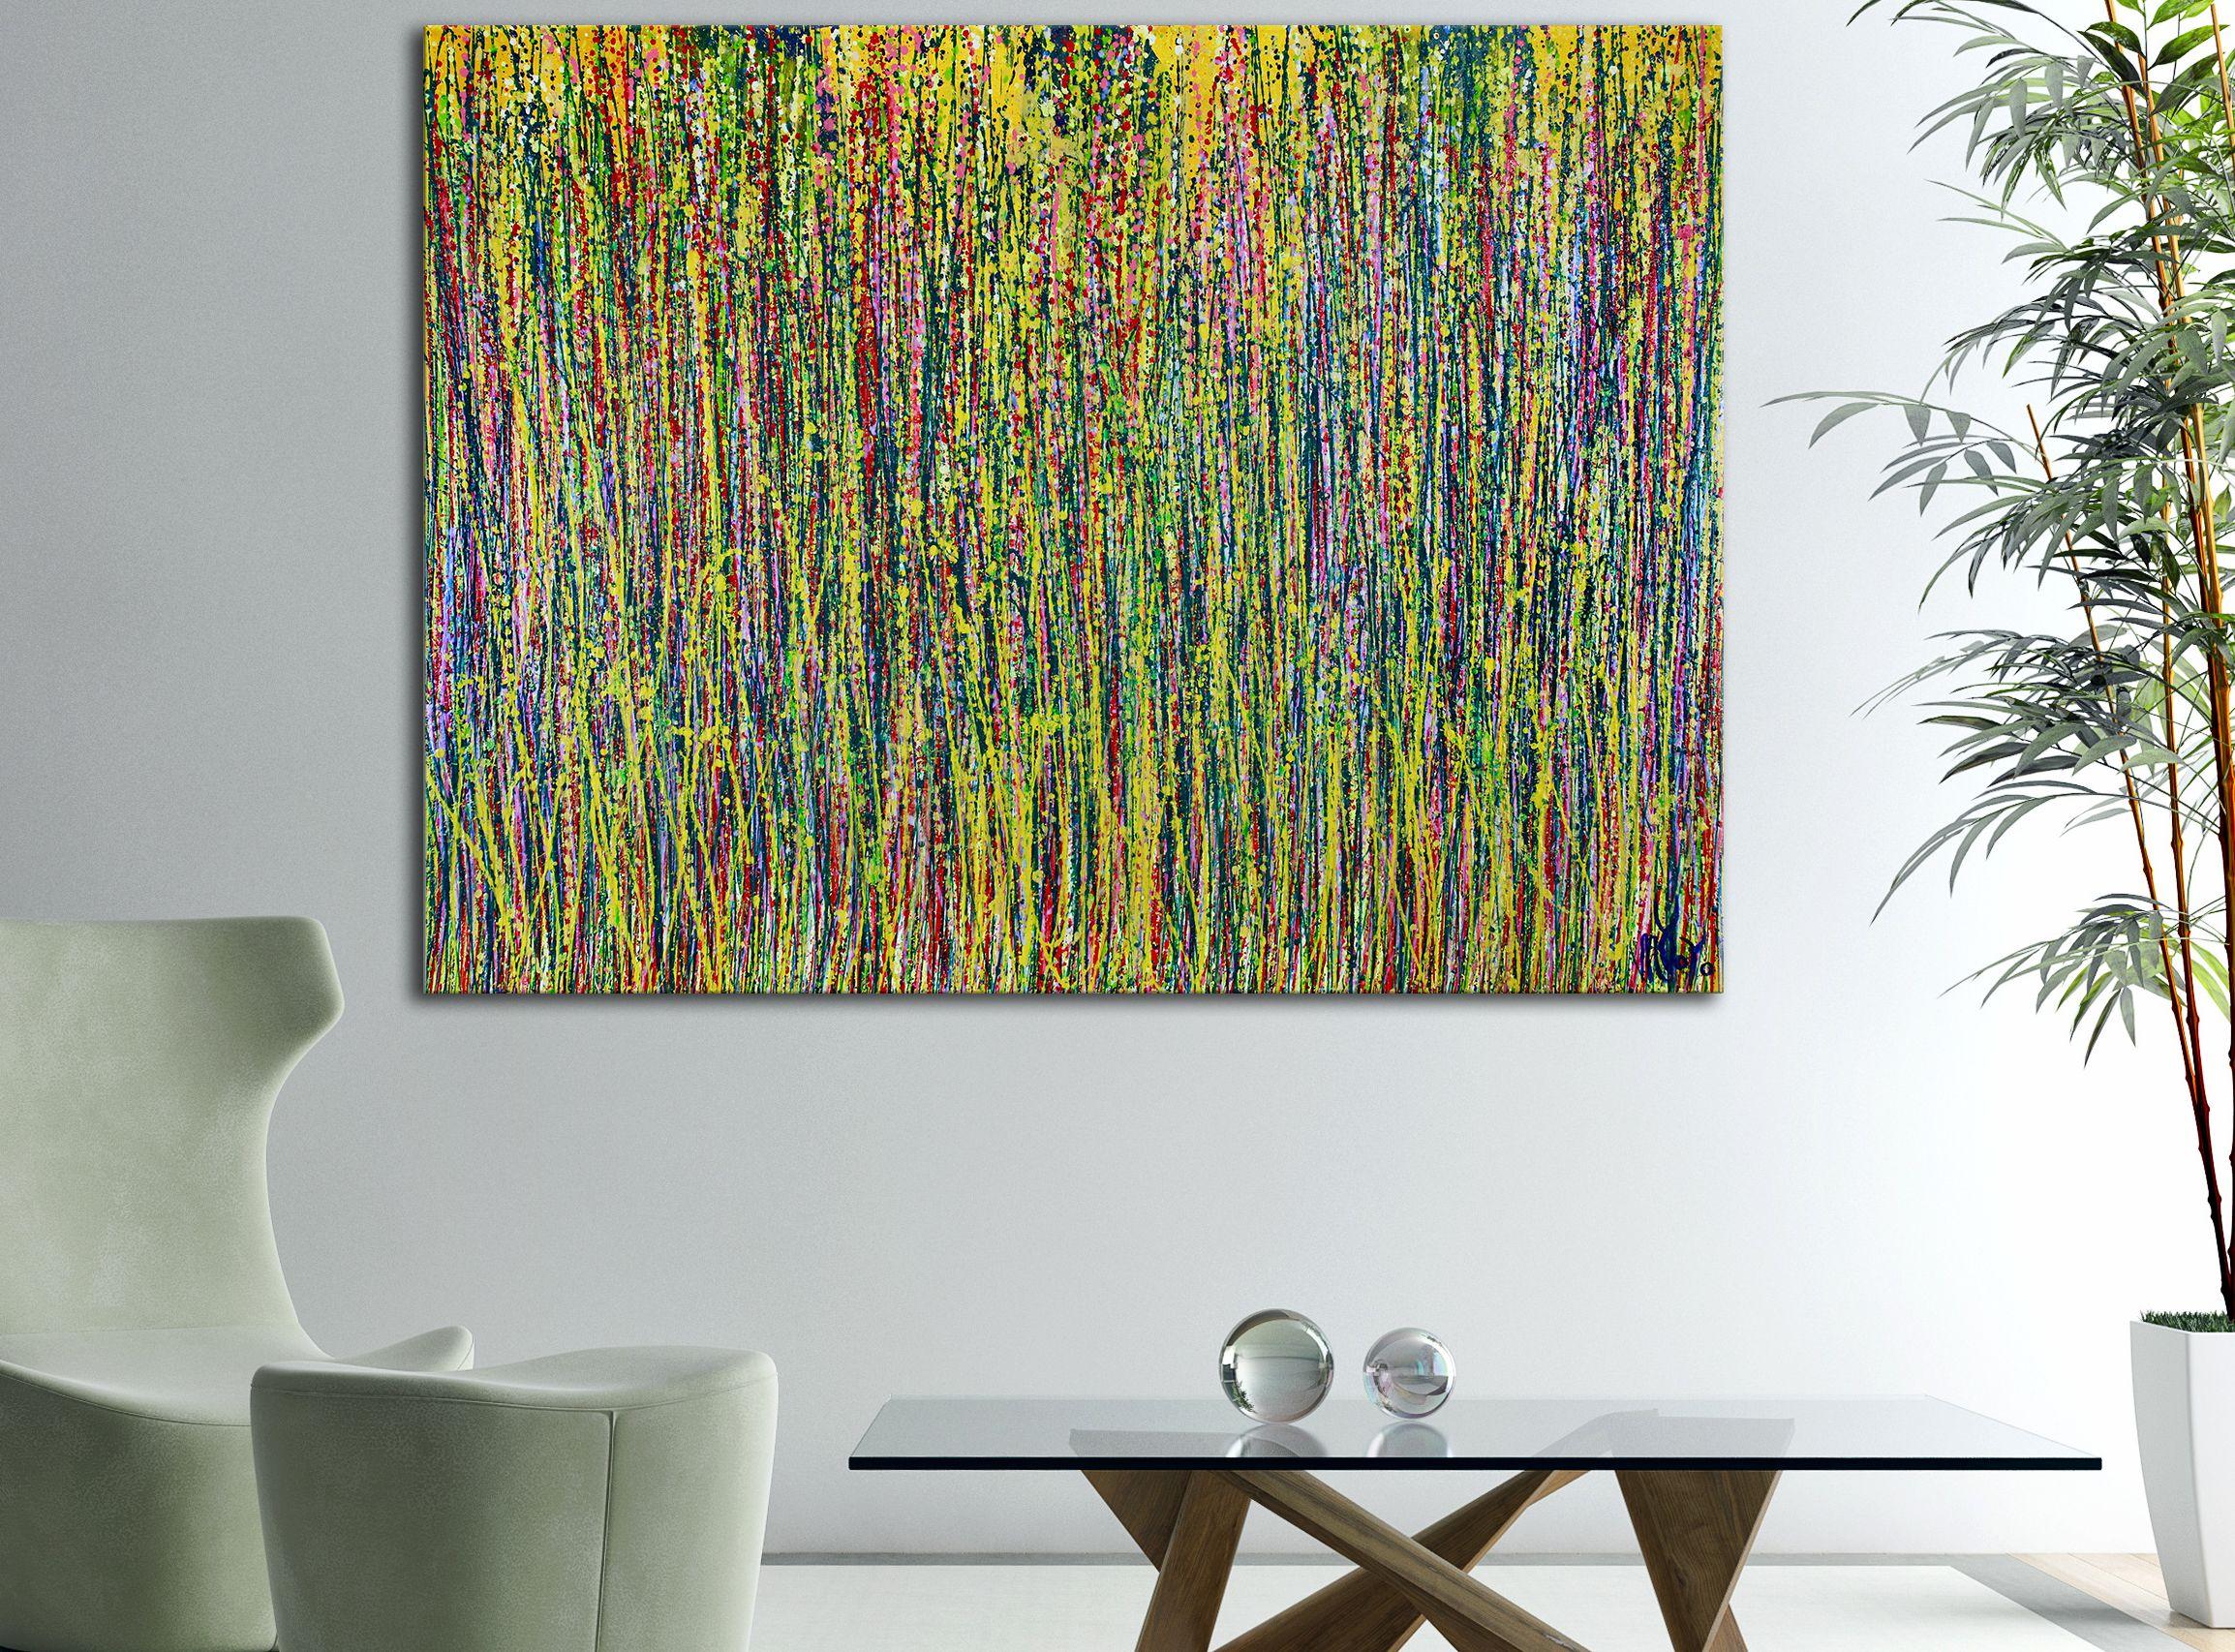 READY TO HANG STATEMENT ARTWORK!    Textured and vibrant artwork with many paint strokes in vivid colors. Yellows, green, dark orange and iridescent mica particles. Ready to hang signed in front! True statement piece.    This original one of a kind